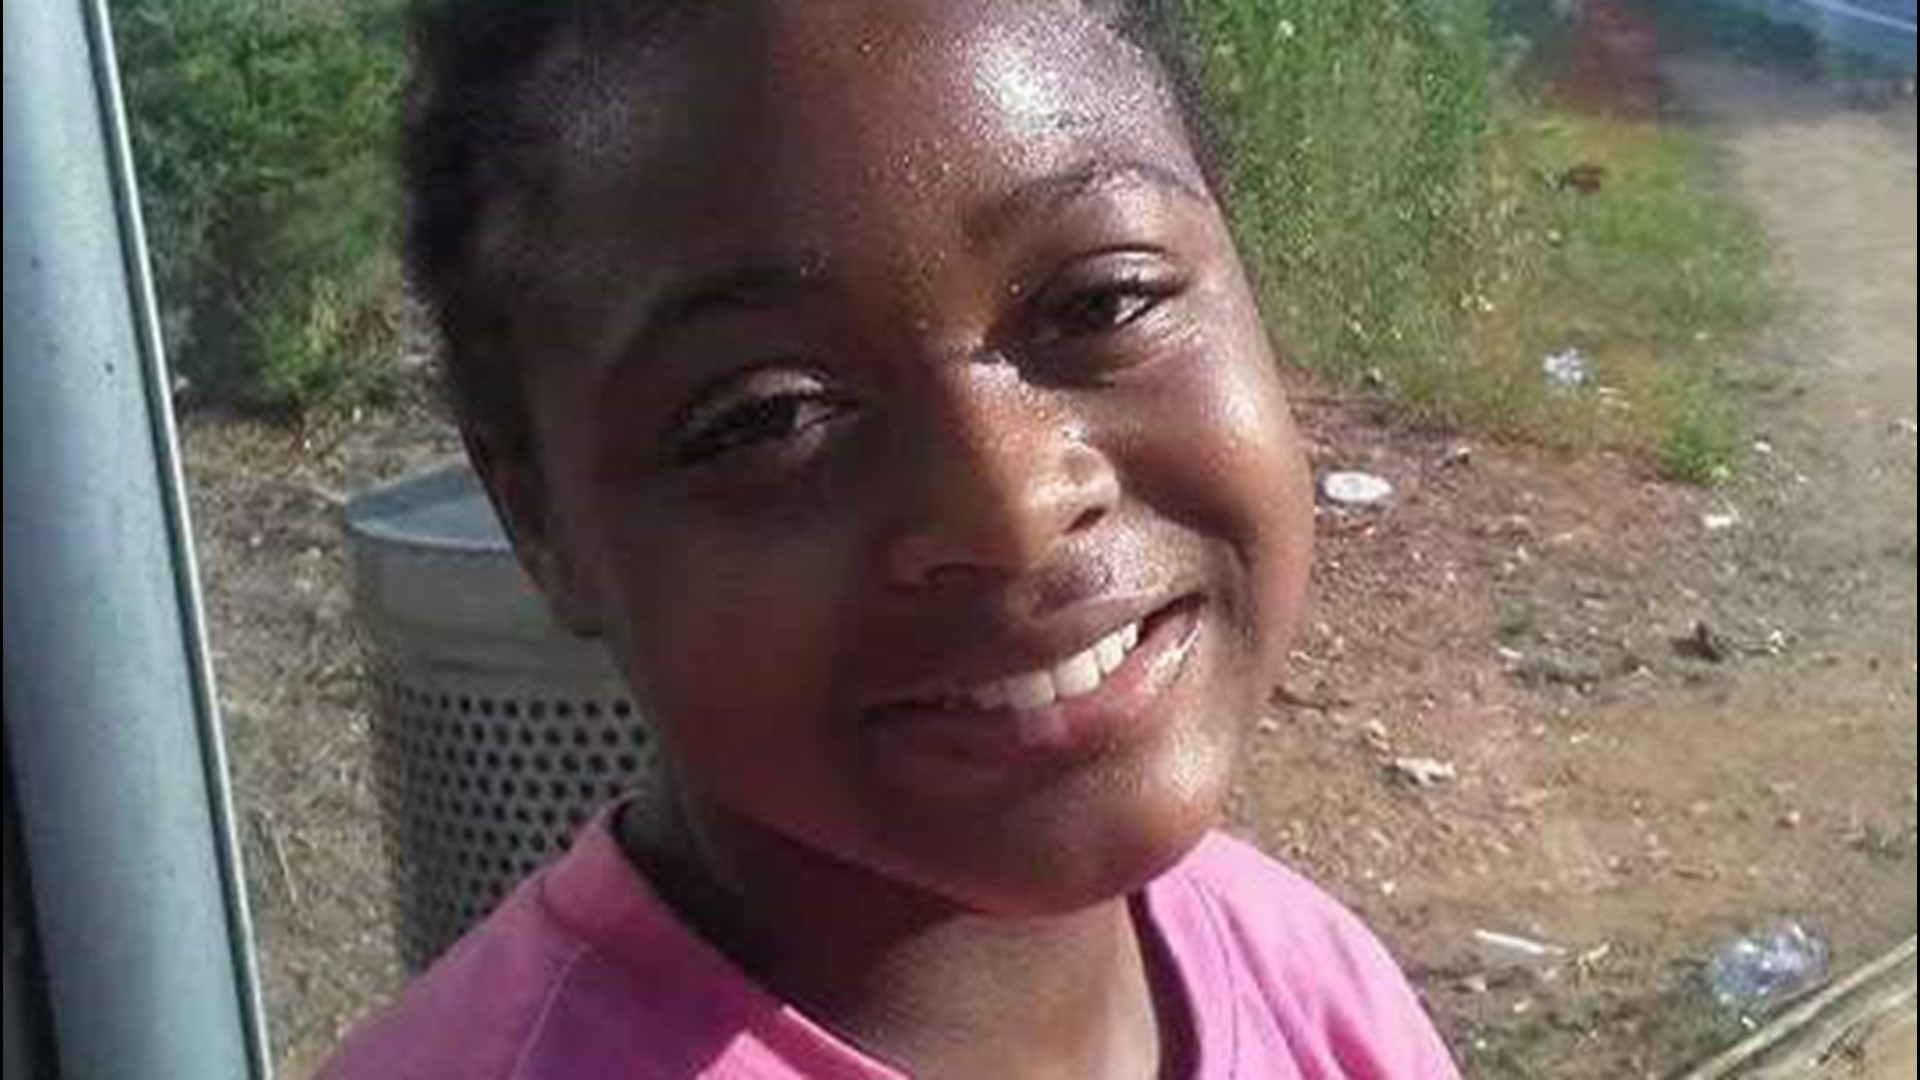 Police said a bullet flew from the upstairs apartment and killed 14-year-old Sonja Harrison.